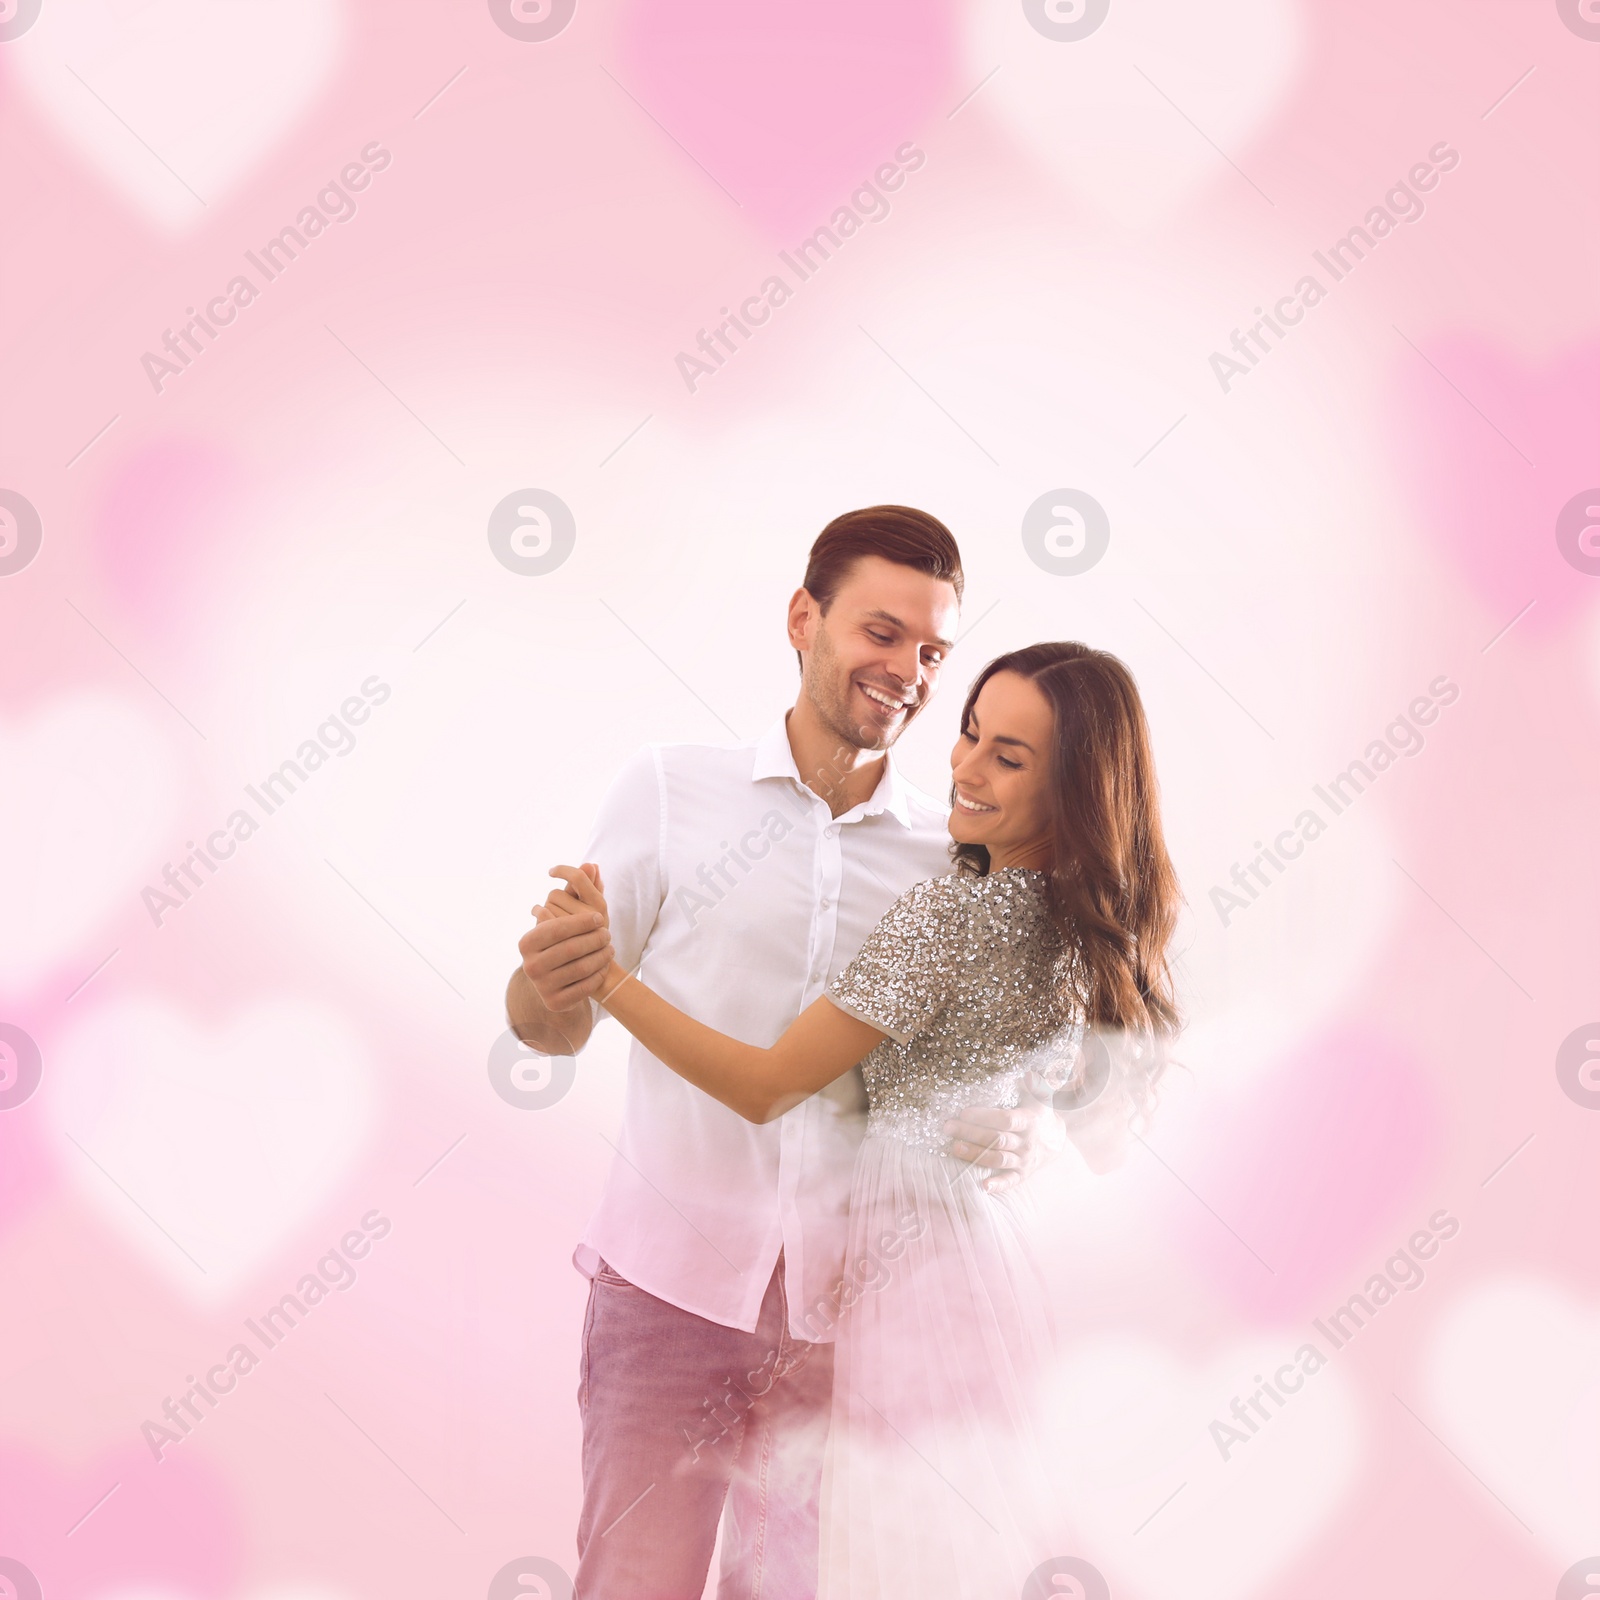 Image of Lovely young couple dancing together on pink background. Valentine's day